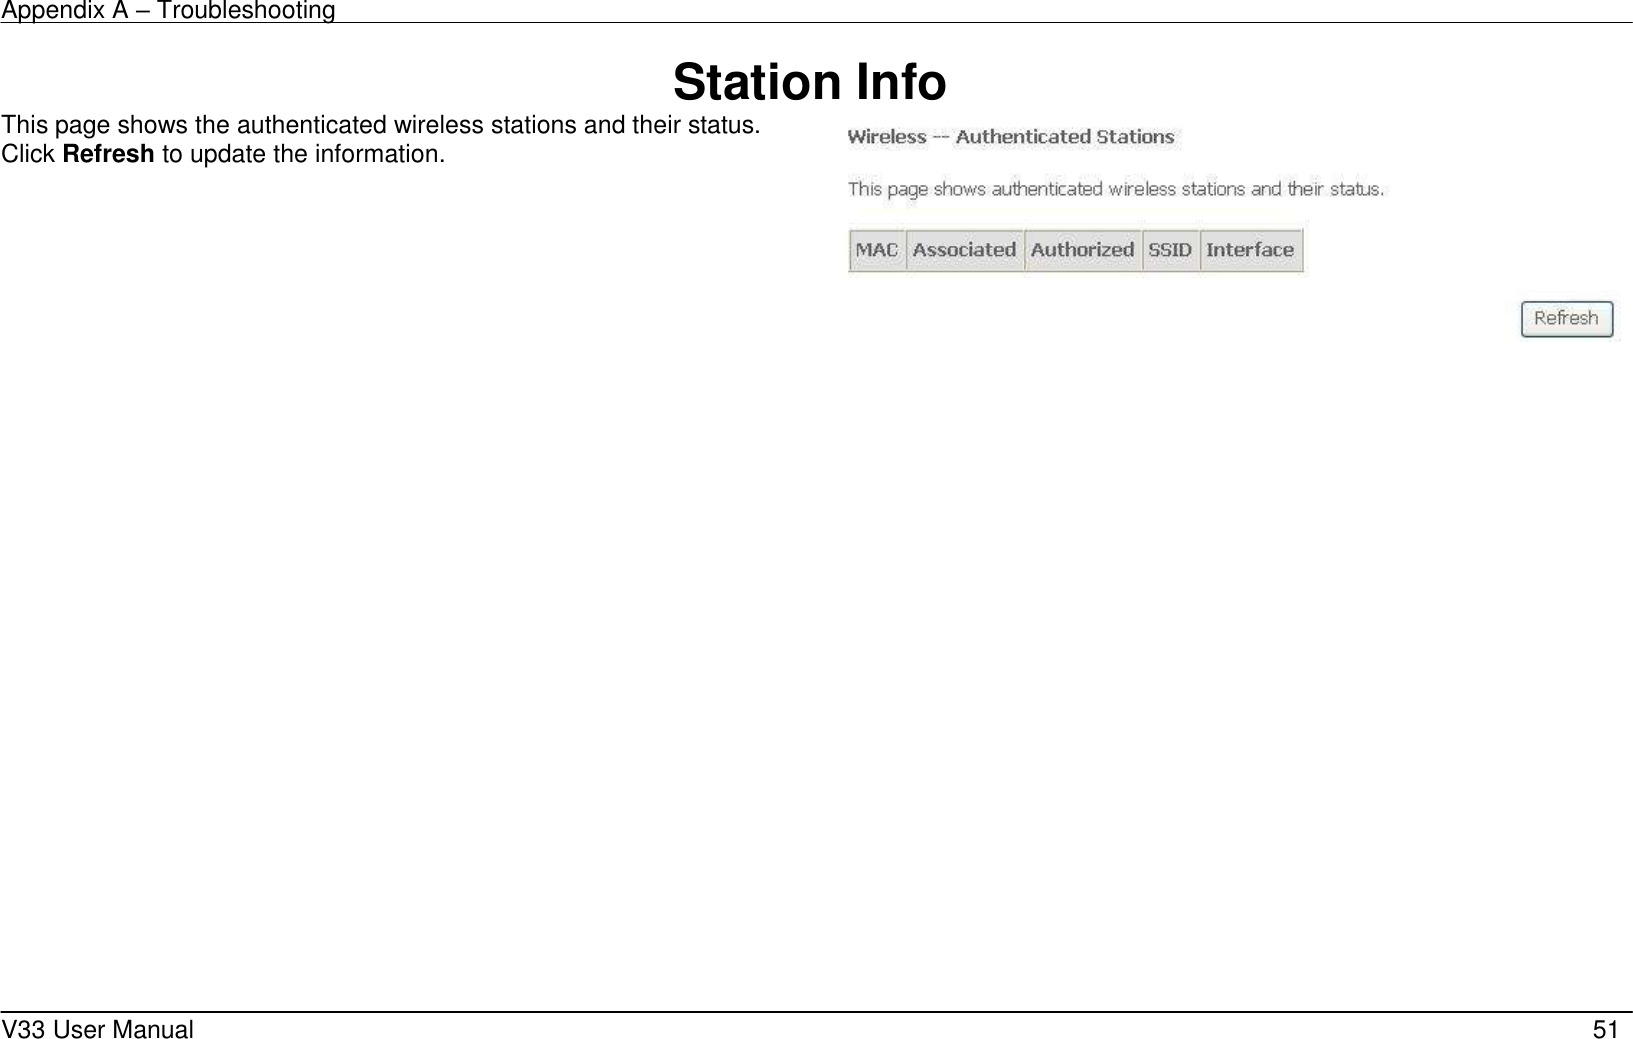 Appendix A – Troubleshooting    V33 User Manual   51 Station Info This page shows the authenticated wireless stations and their status. Click Refresh to update the information.                       